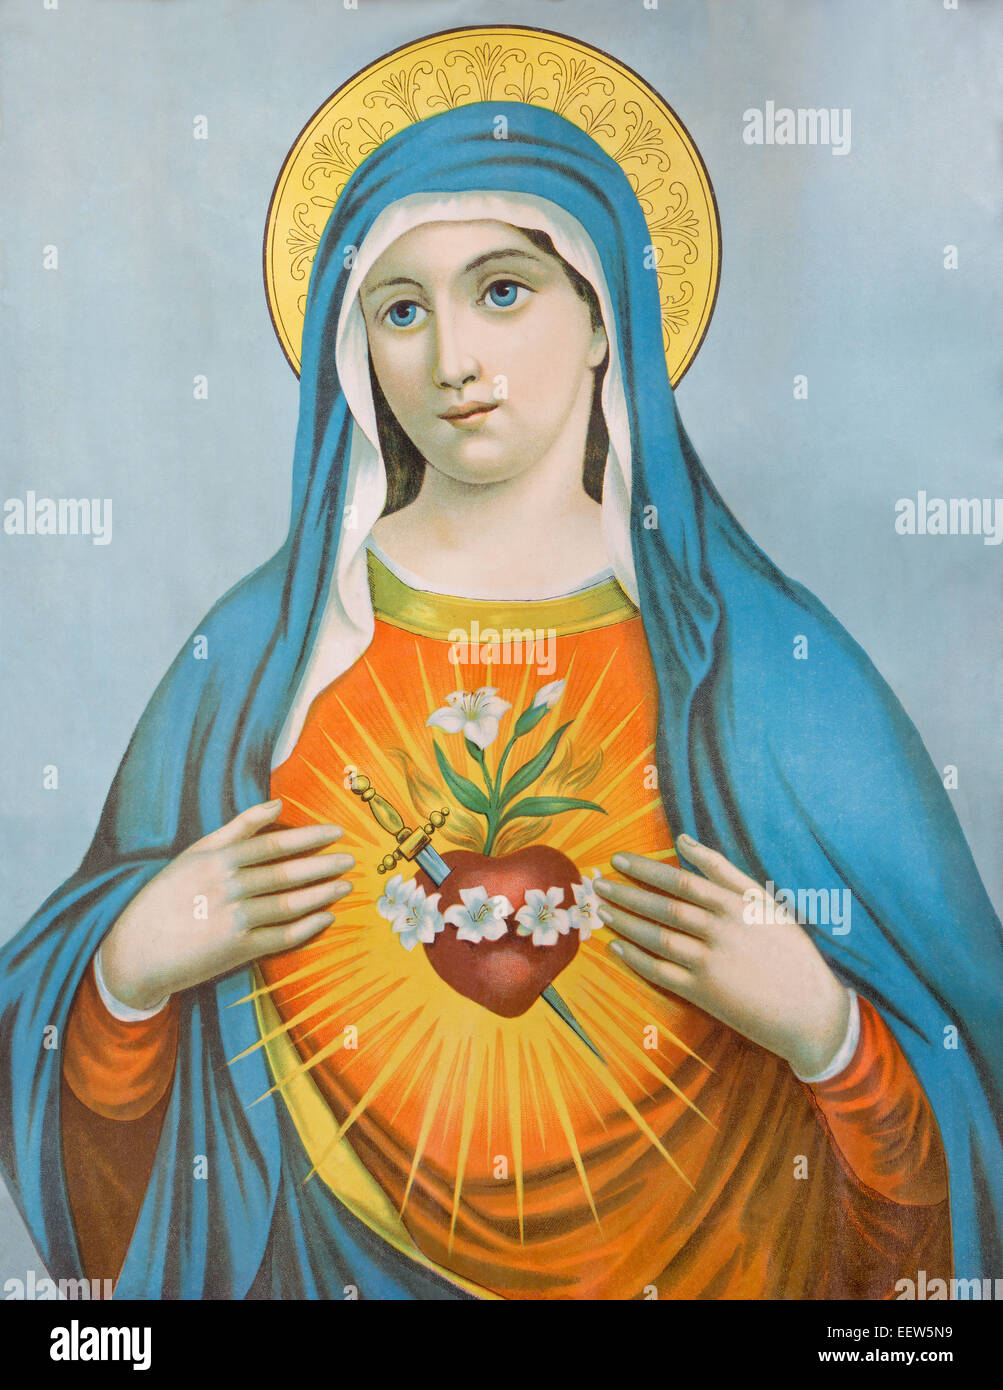 The Heart of Virgin Mary. Typical catholic image (in my own home) printed in Germany from the end of 19. cent. Stock Photo